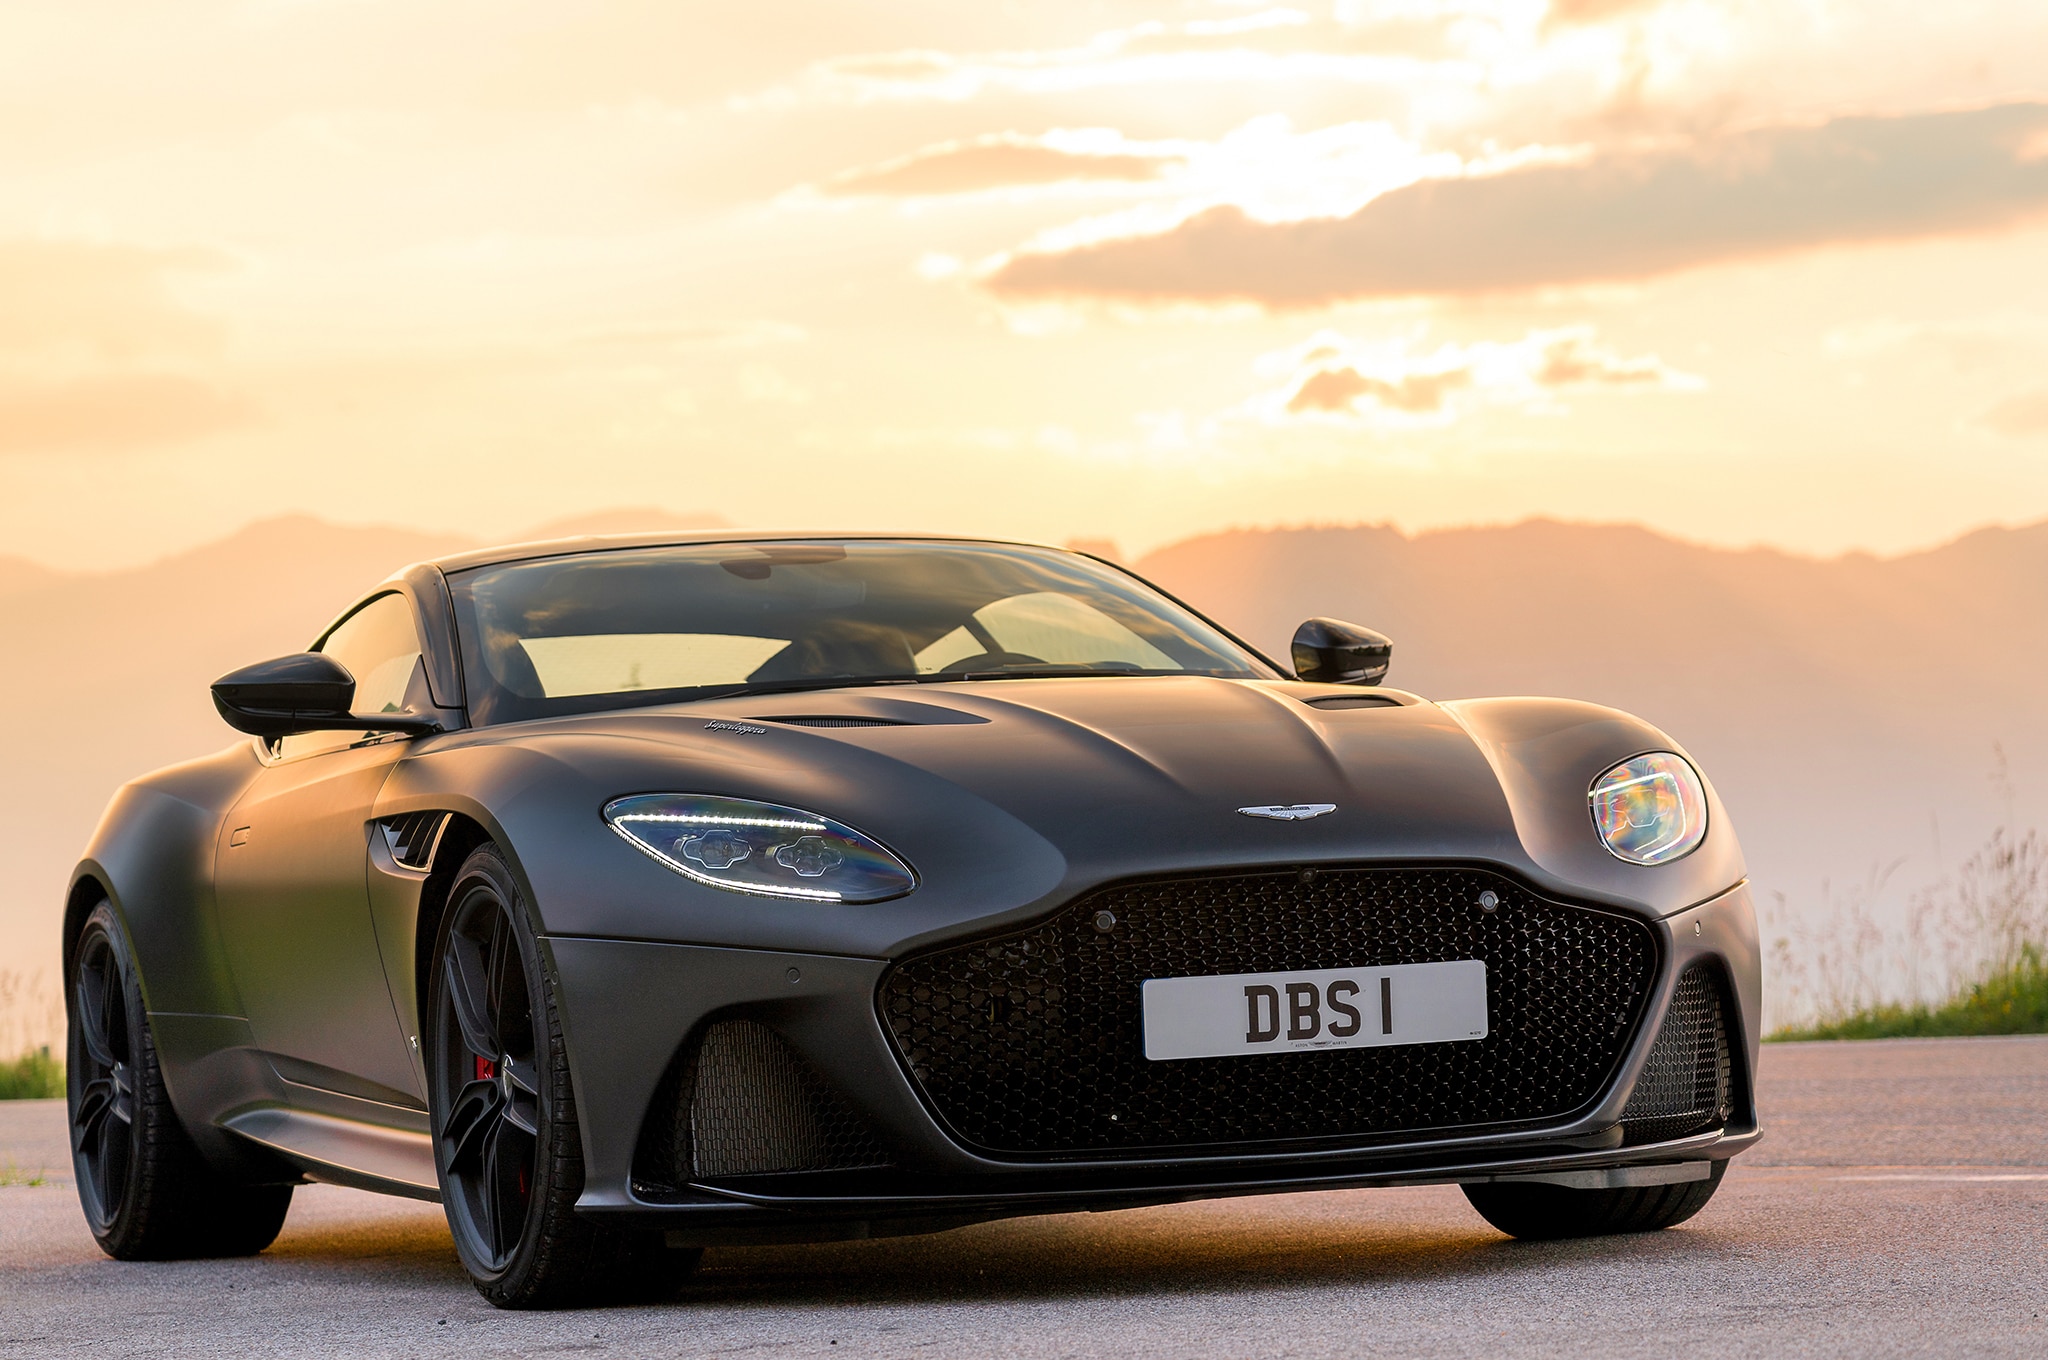 Free Download Aston Martin Dbs Superleggera Volante Hd Wallpapers Background 2048x1360 For Your Desktop Mobile Tablet Explore 44 Martin Background Martin Wallpaper Martin Background Martin Garrix Wallpapers